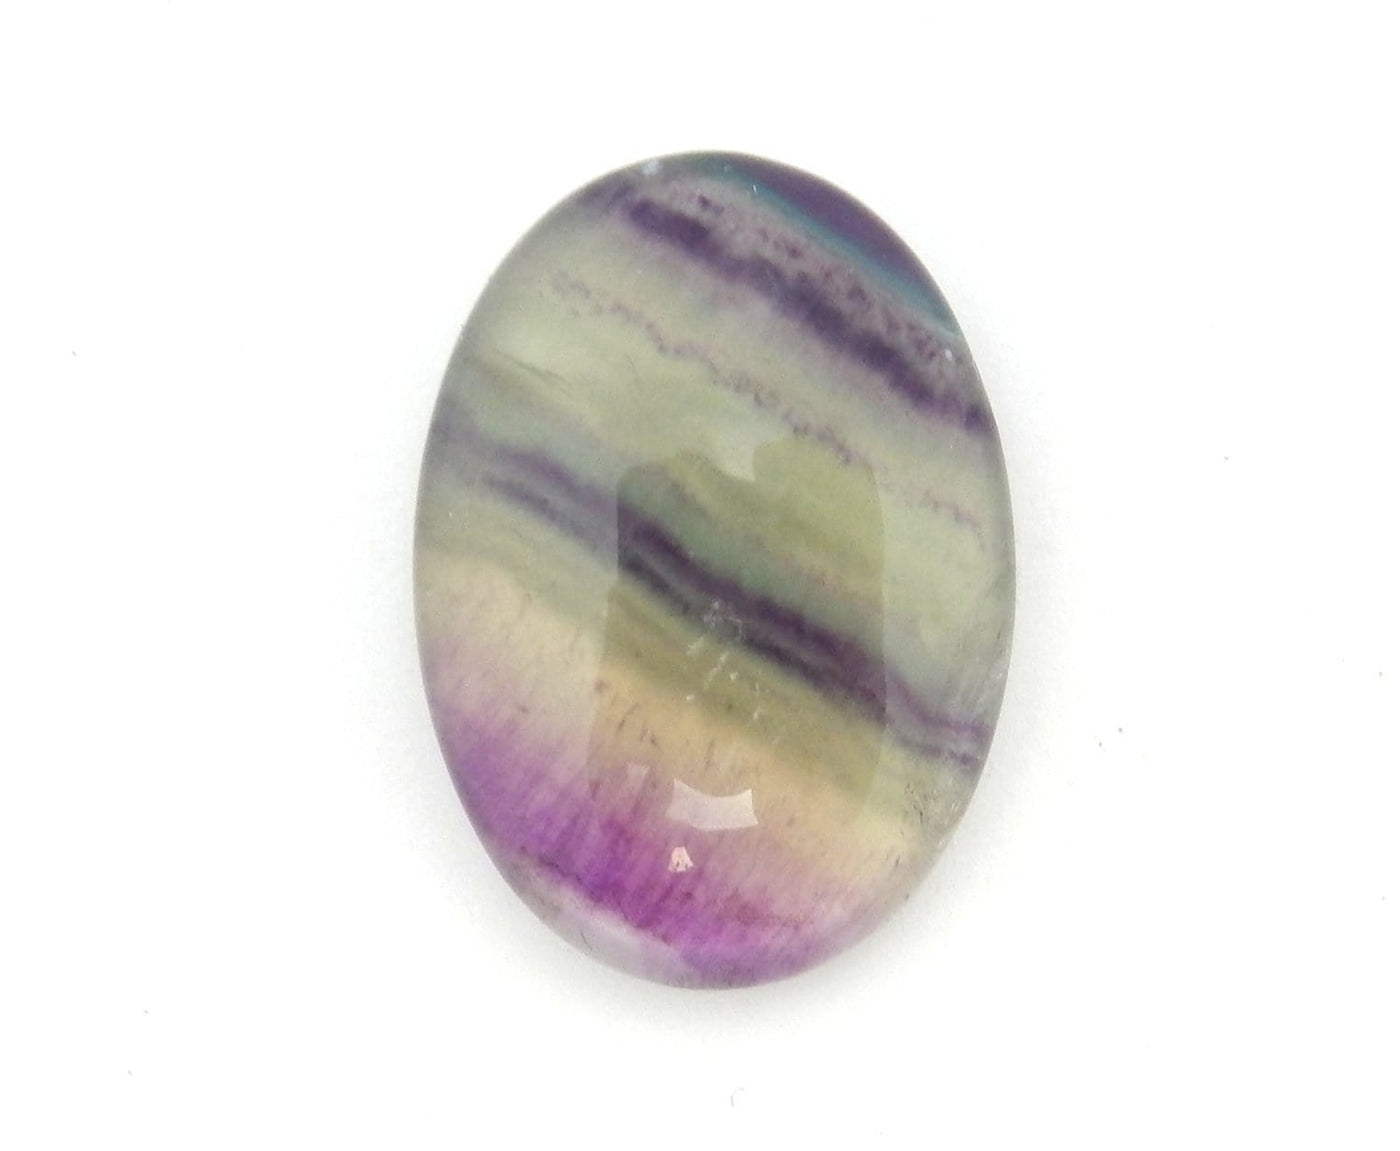 Fluorite Cabochon displayed up close to show details and shades of green purple and clear